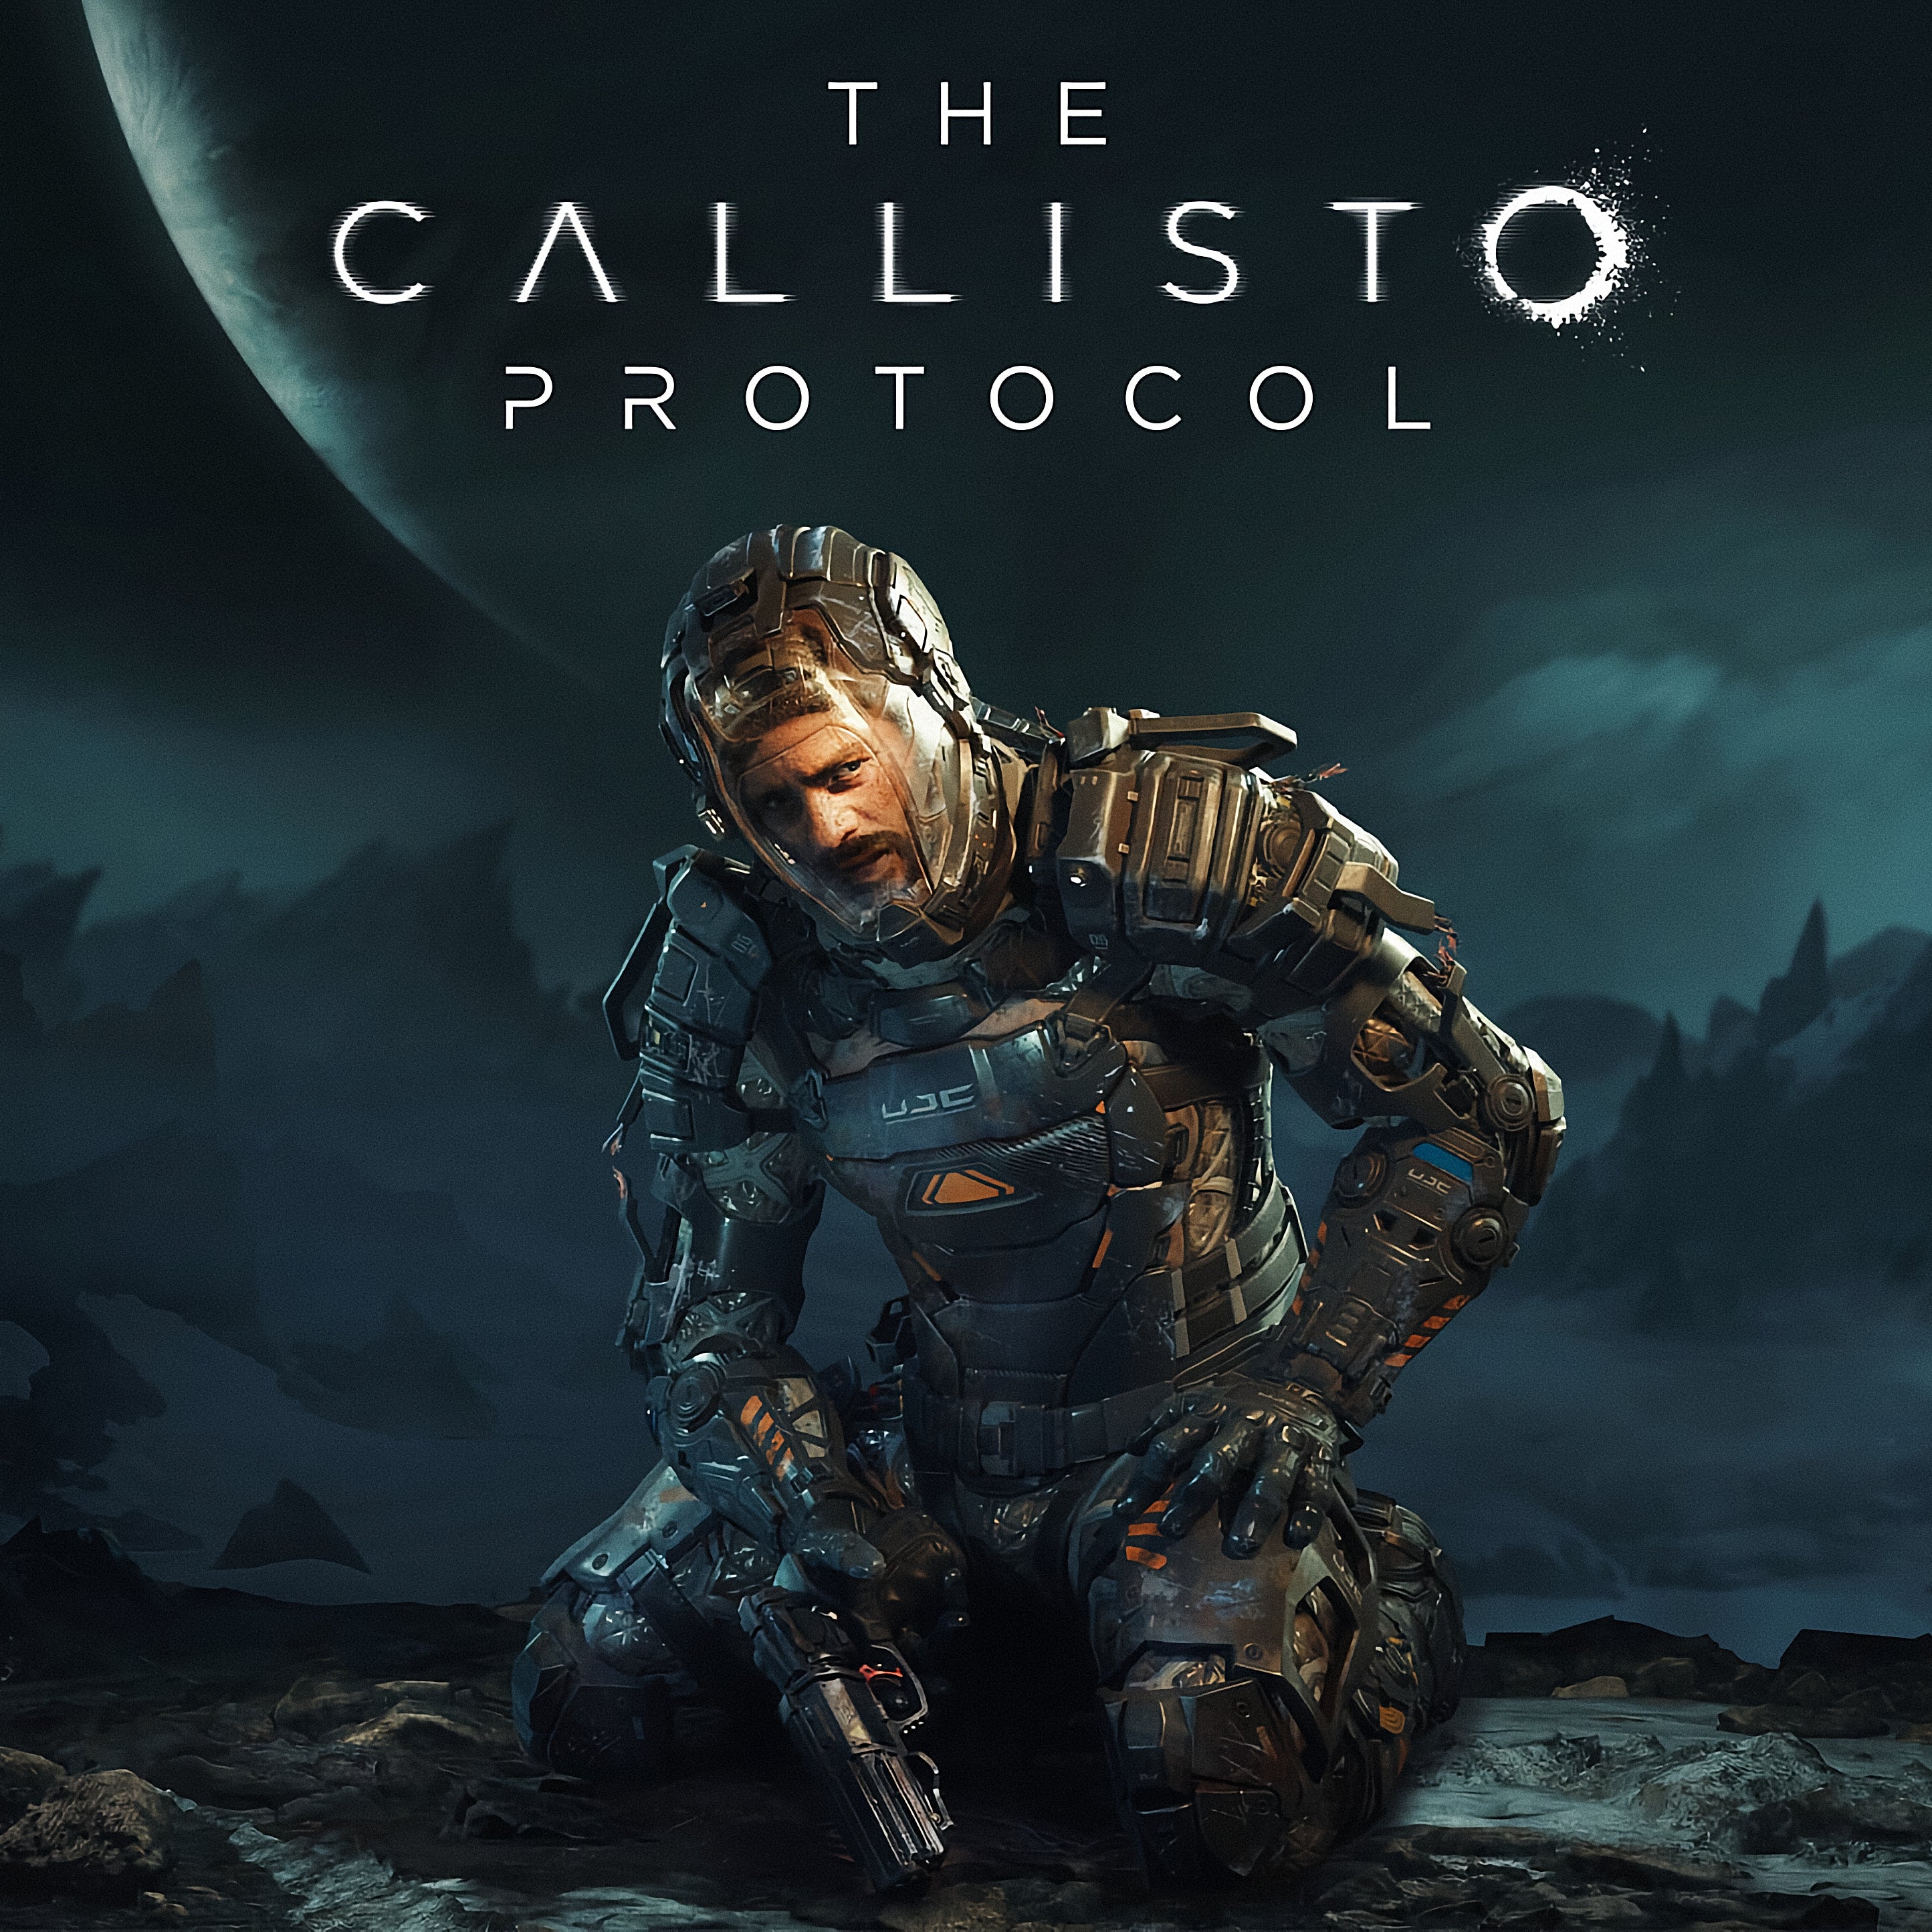 The Callisto Protocol review: A dead frustrating space